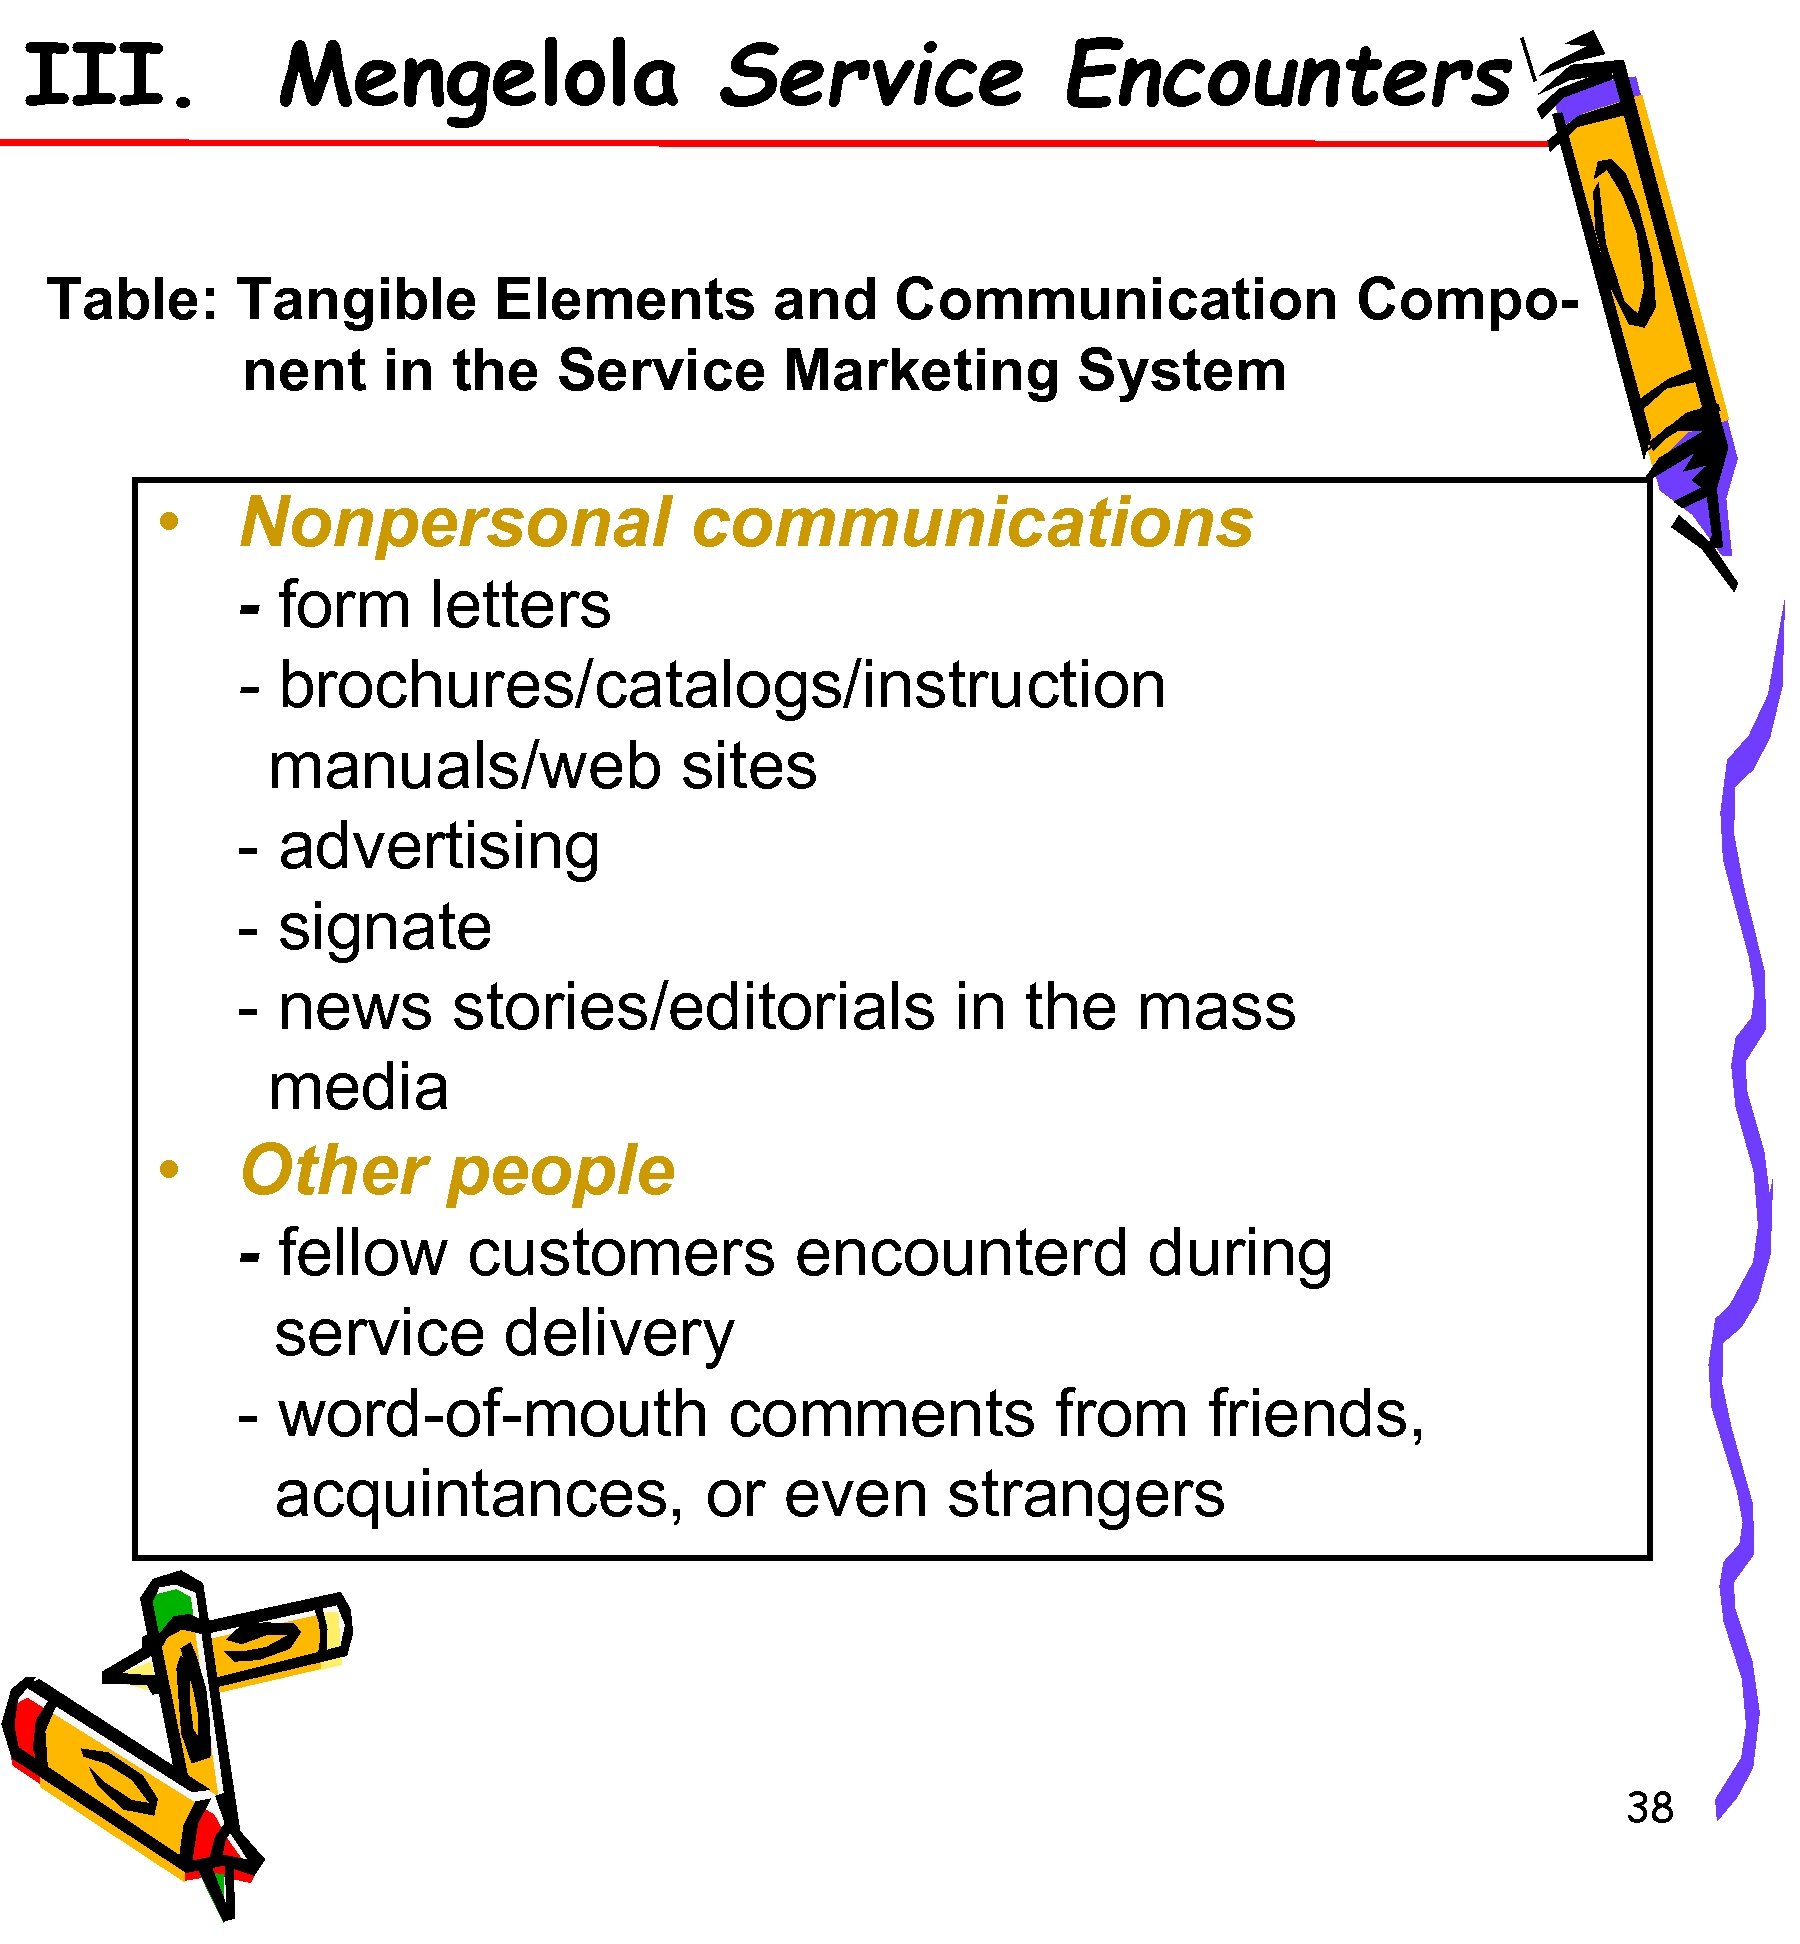 III. Mengelola Service Encounters Table: Tangible Elements and Communication Component in the Service Marketing